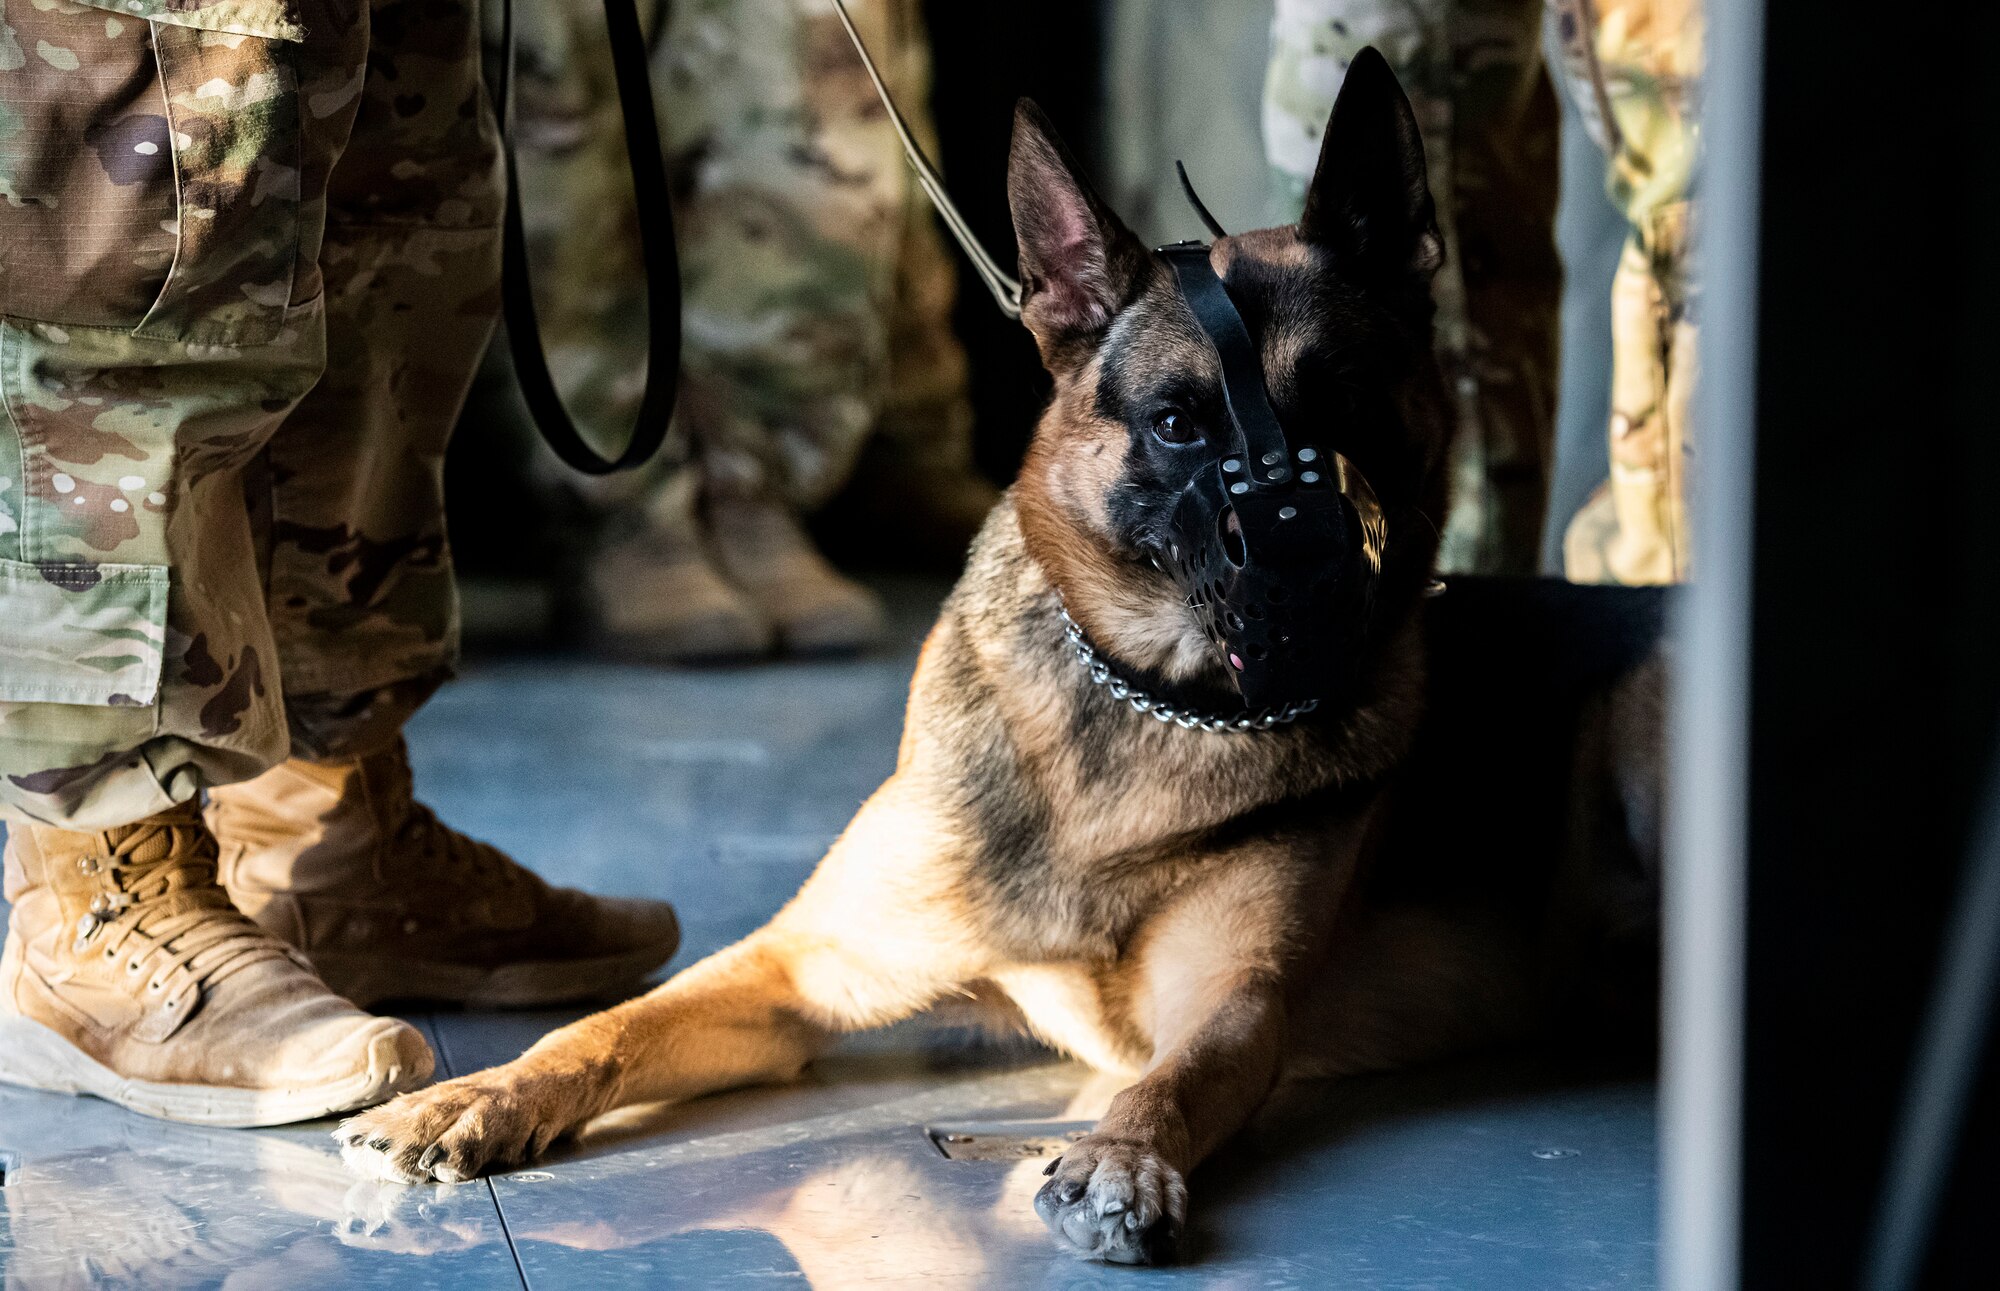 Military working dog lays on floor of airplane.